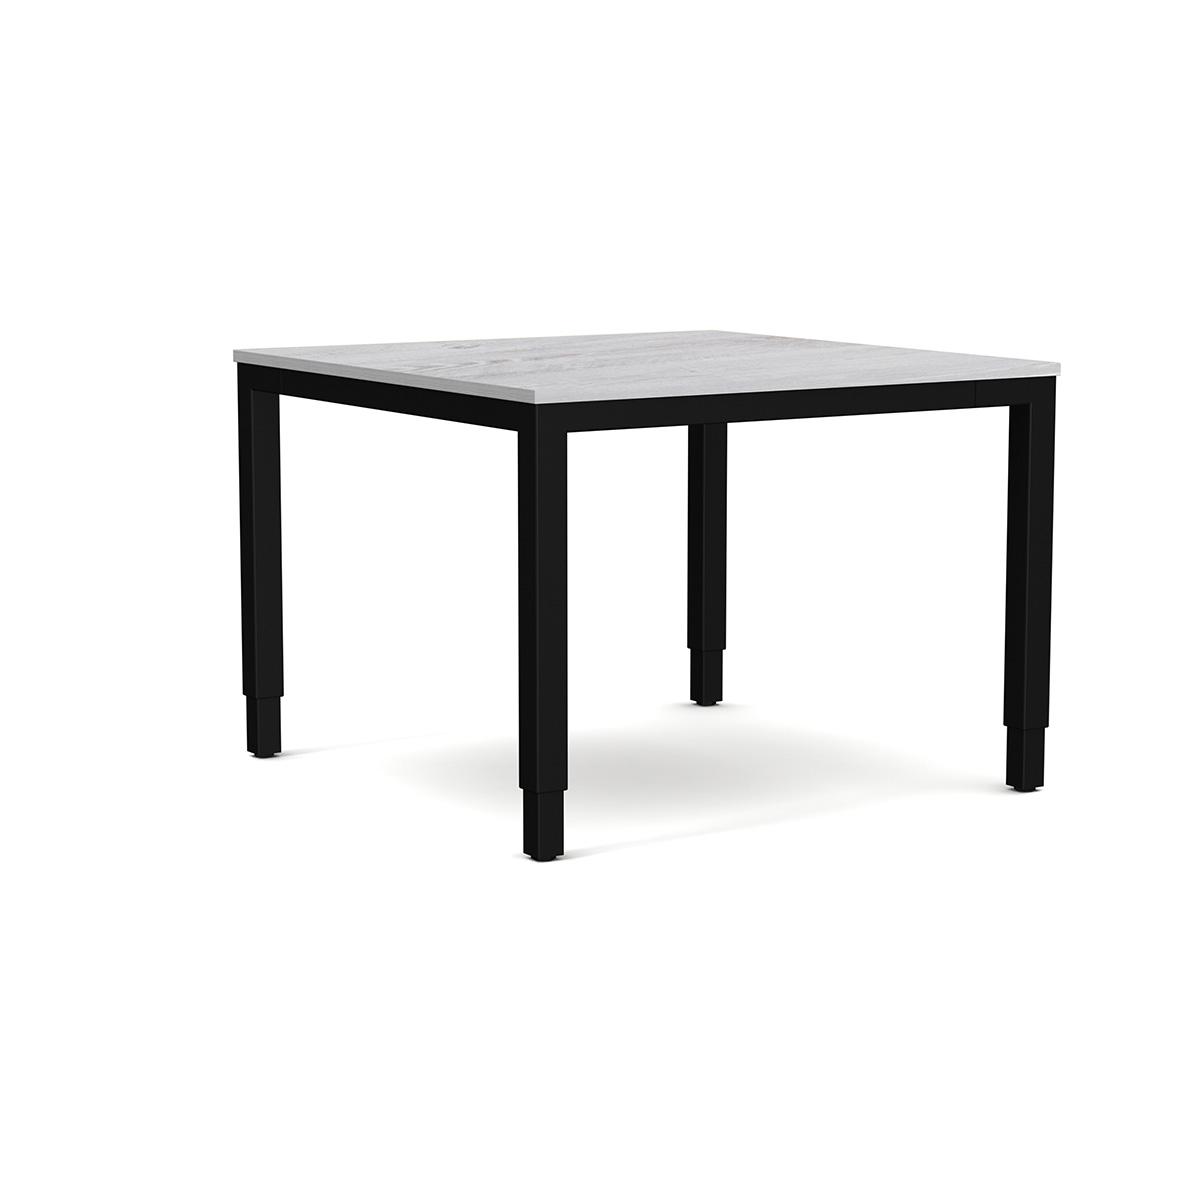 Product Collaborate Mini - Sit-Stand Table For Meetings - Lavoro Design image